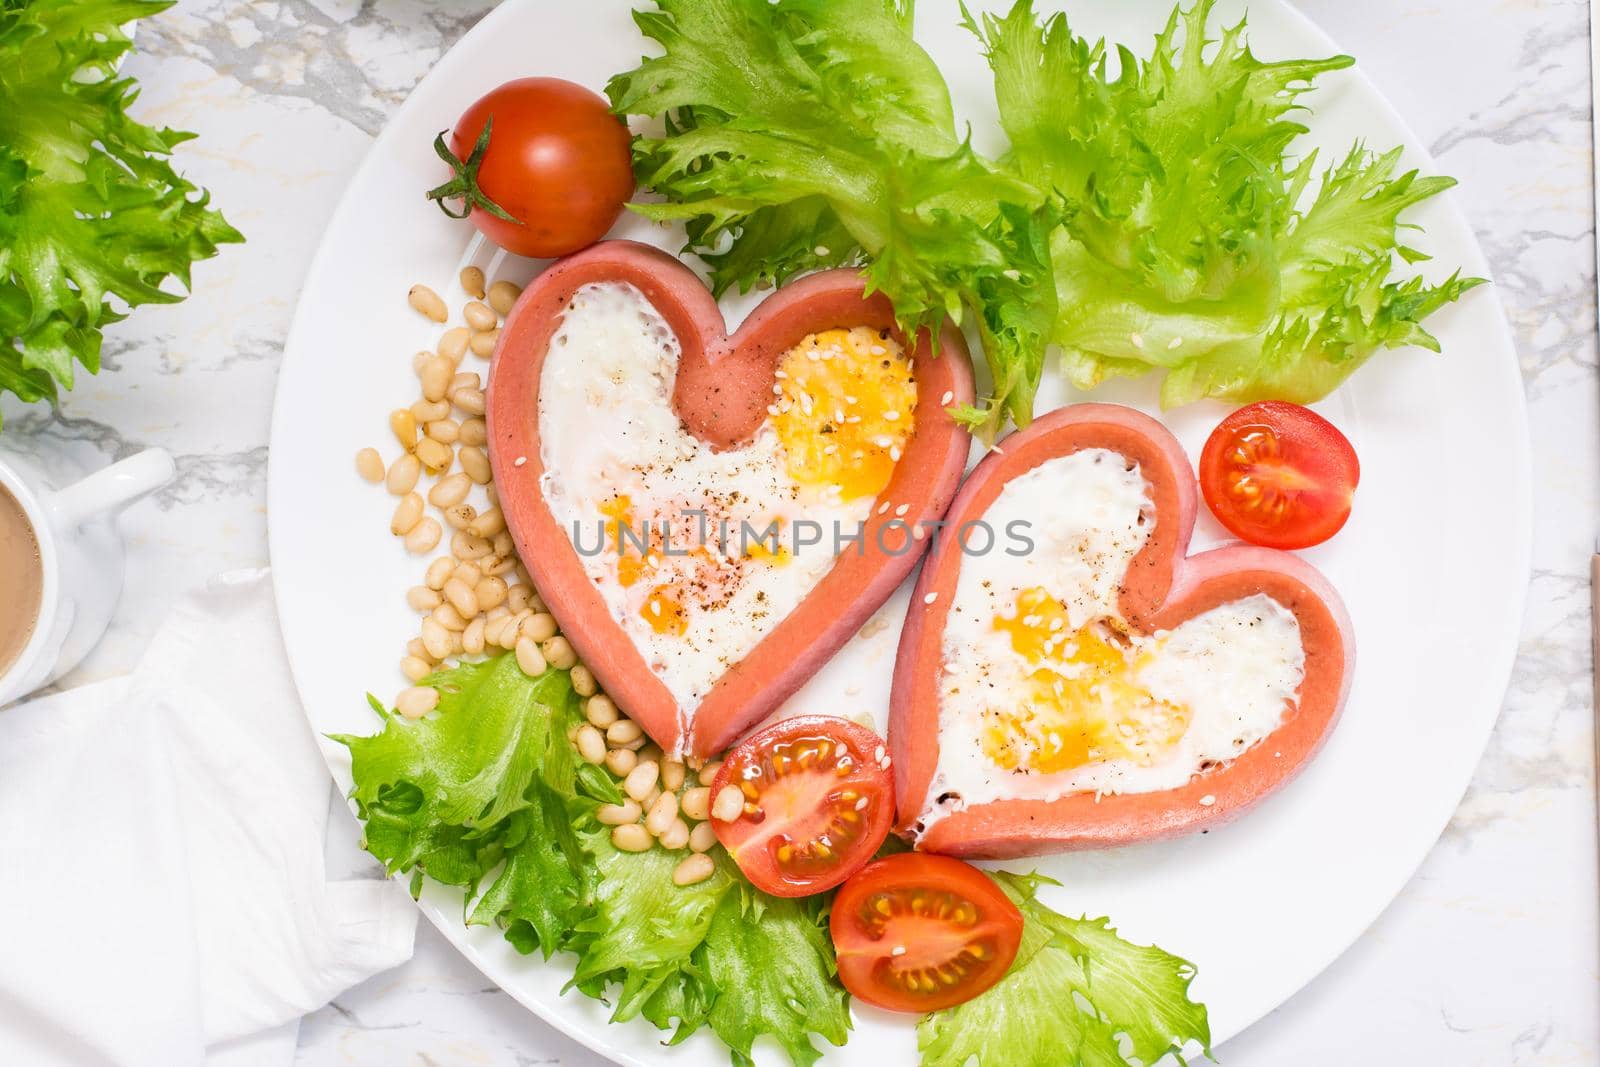 Romantic breakfast. Fried eggs in heart shaped sausages, lettuce and cherry tomatoes on a plate on the table. Top view. Close-up